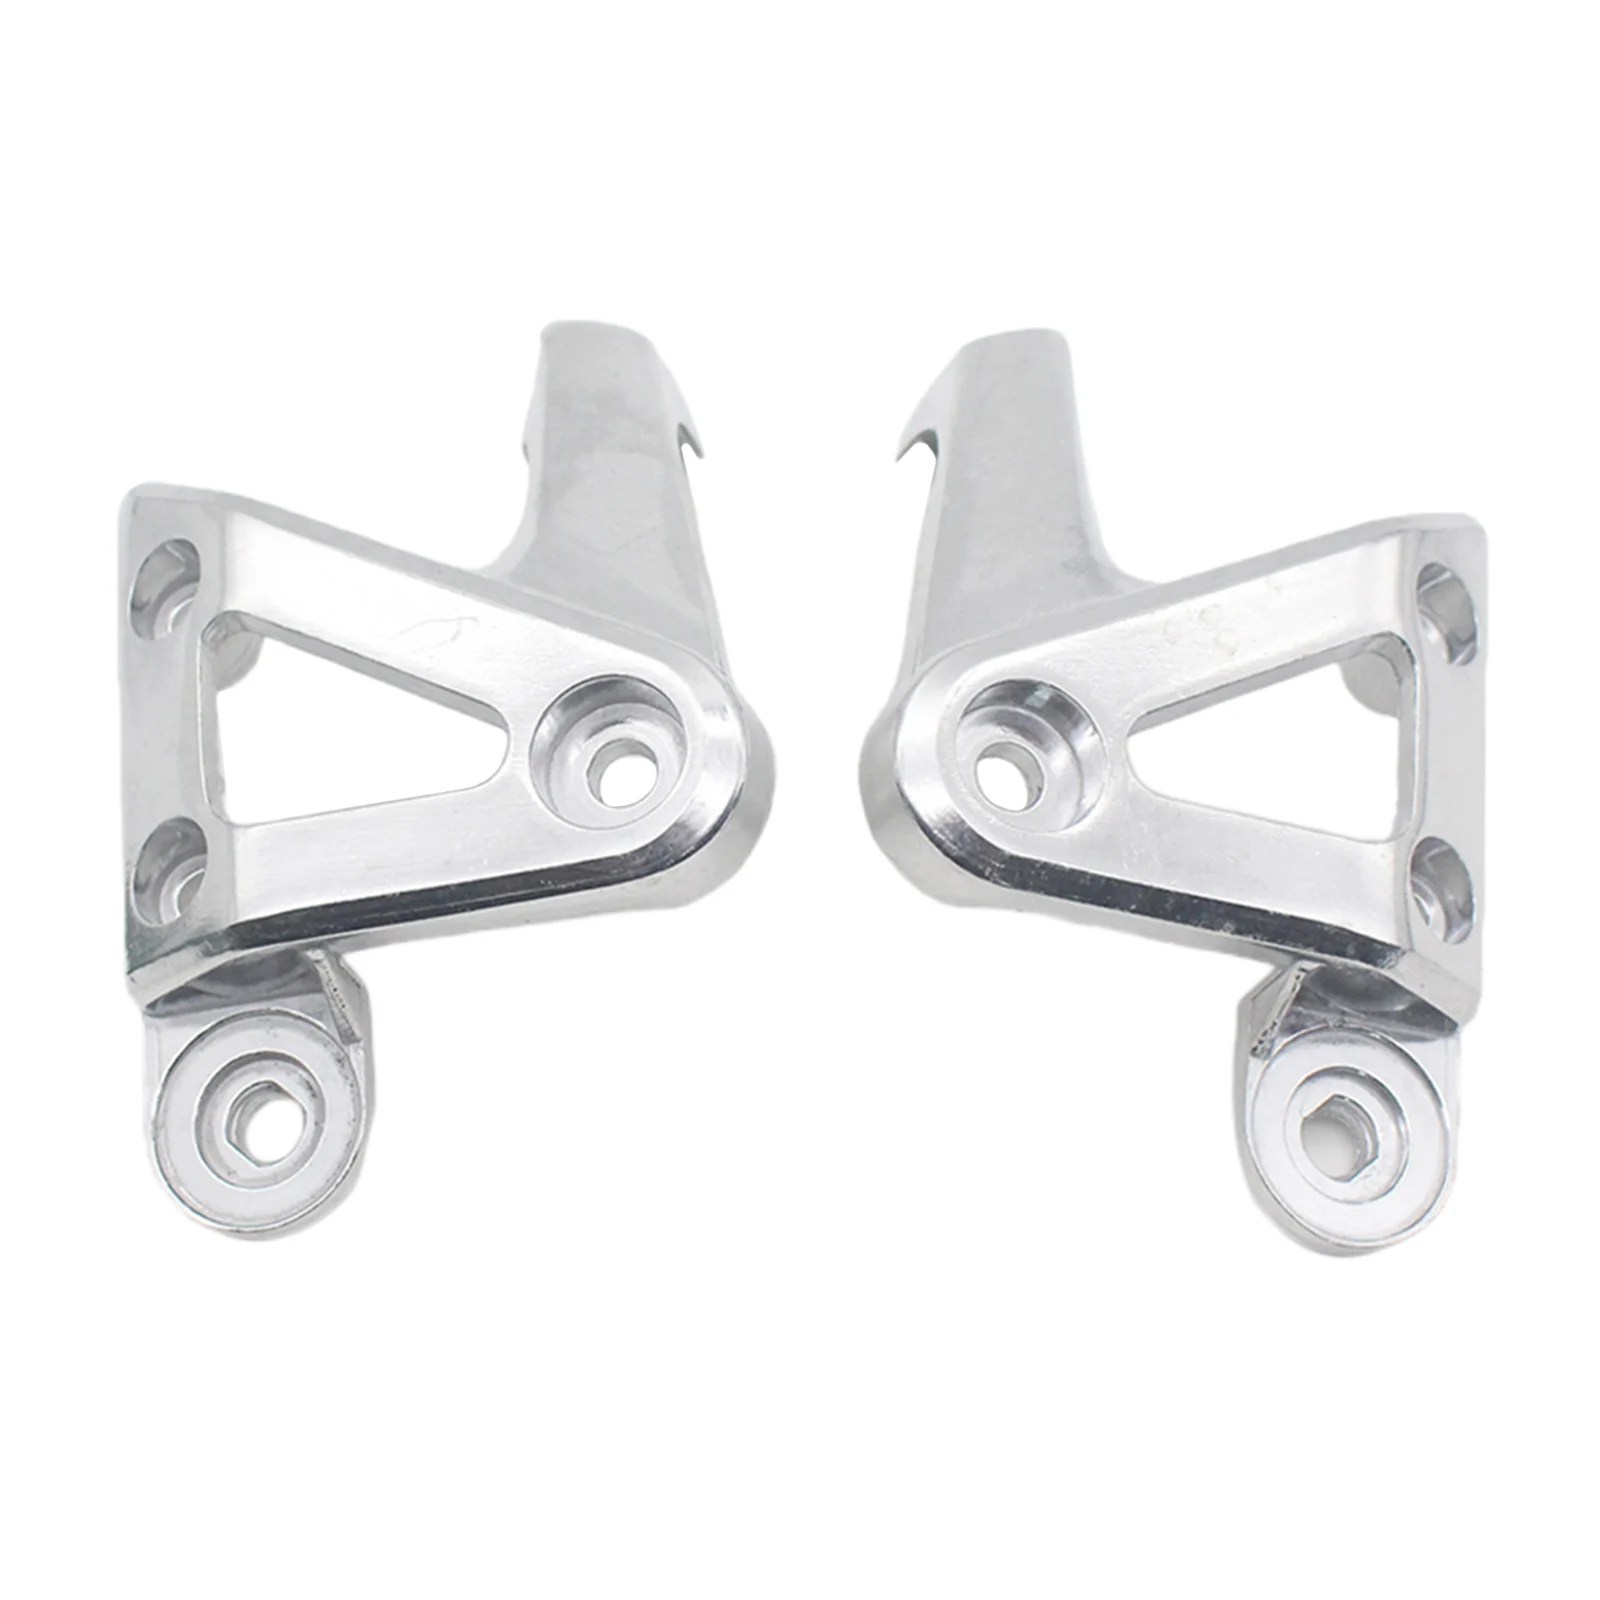 1 Set Alloy Motorcycles Headlight Mount Holders Brackets for Honda CB400 VTEC 1/2/3 1999-2008 Motorcycle Parts Accessories